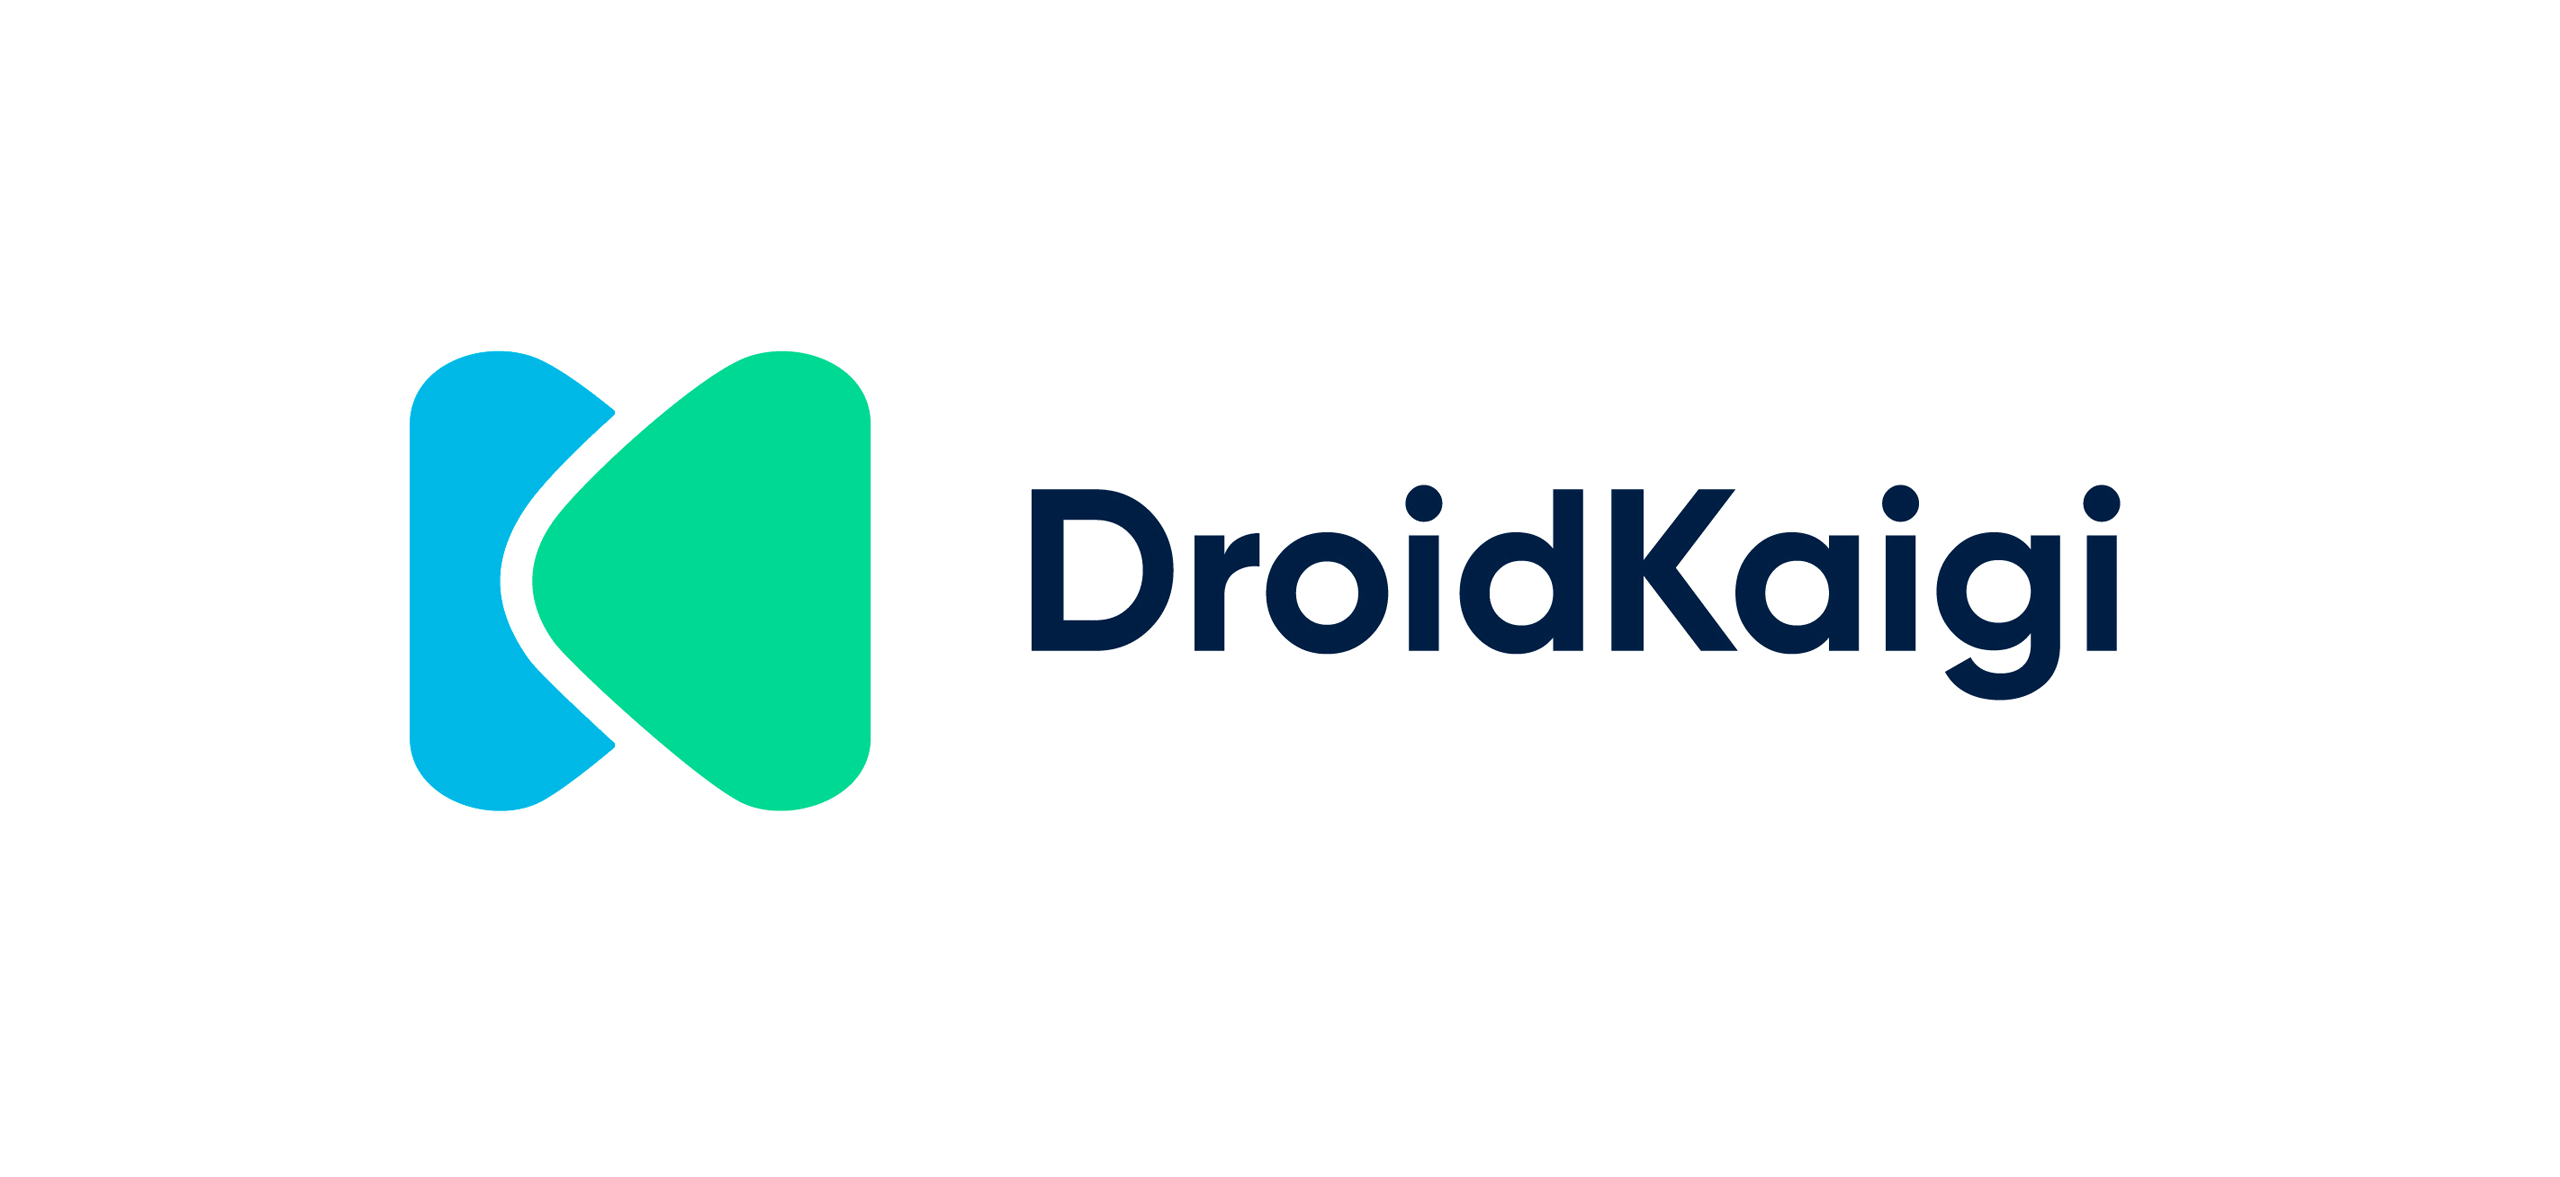 DroidKaigi On Air: Android 11&Android Studio 4.0 まとめ